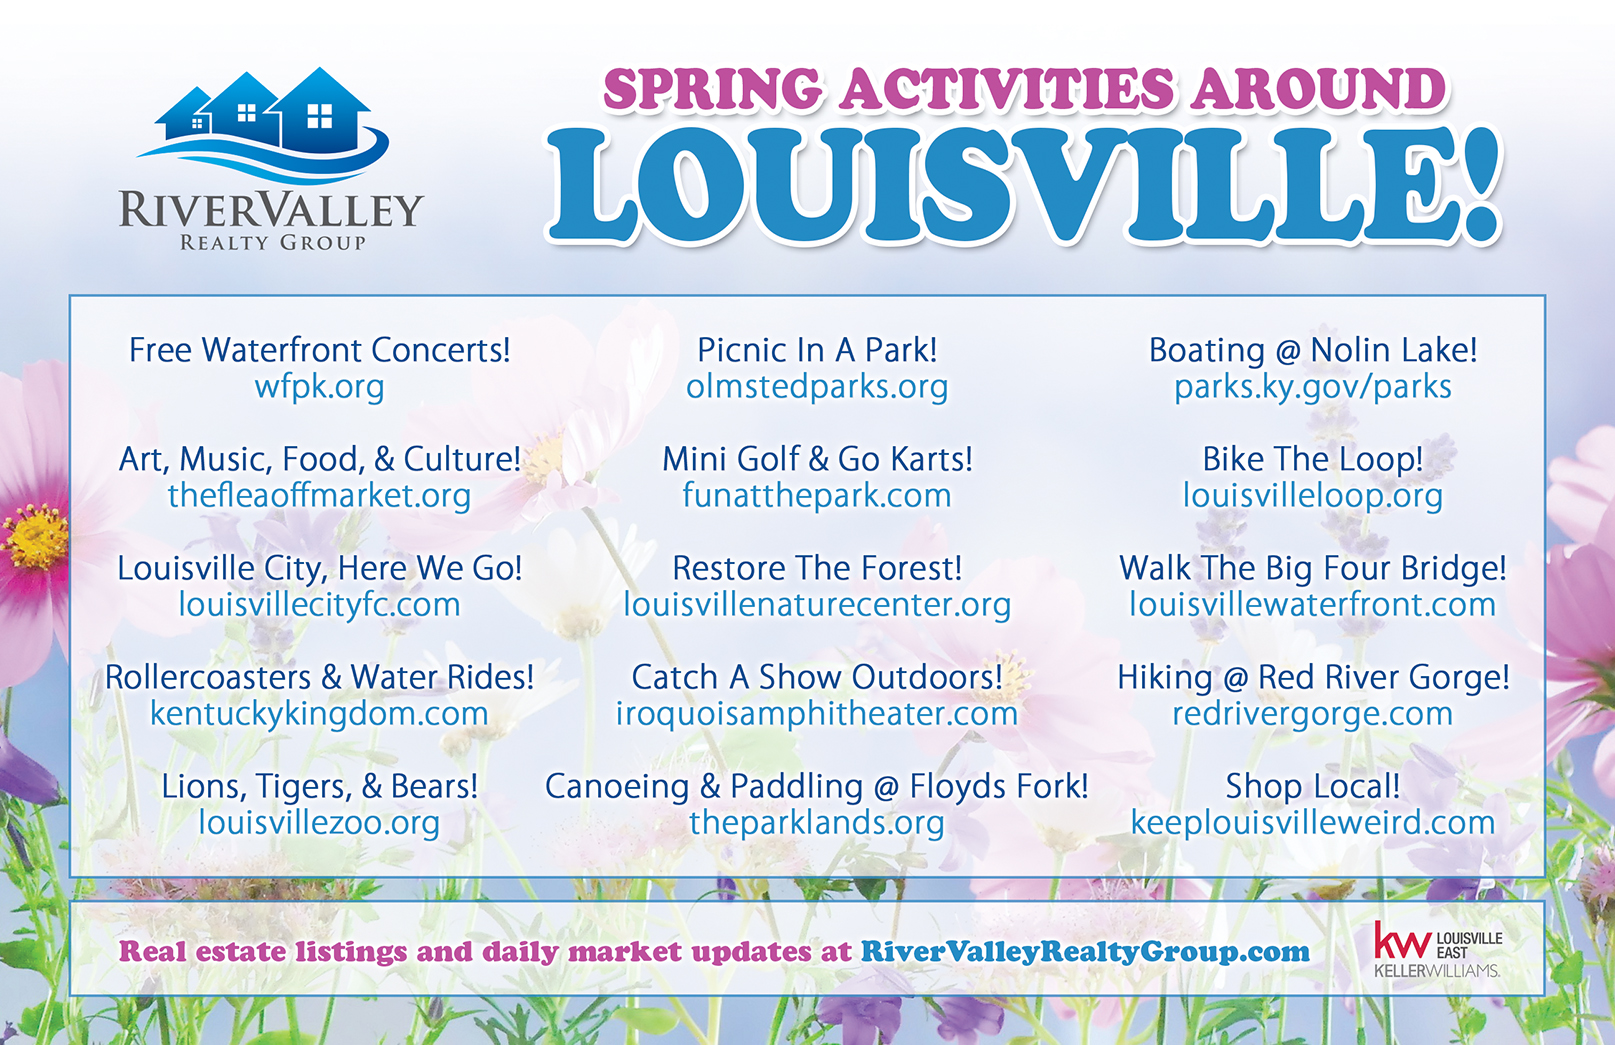 Spring events and activities to check out around Louisville!